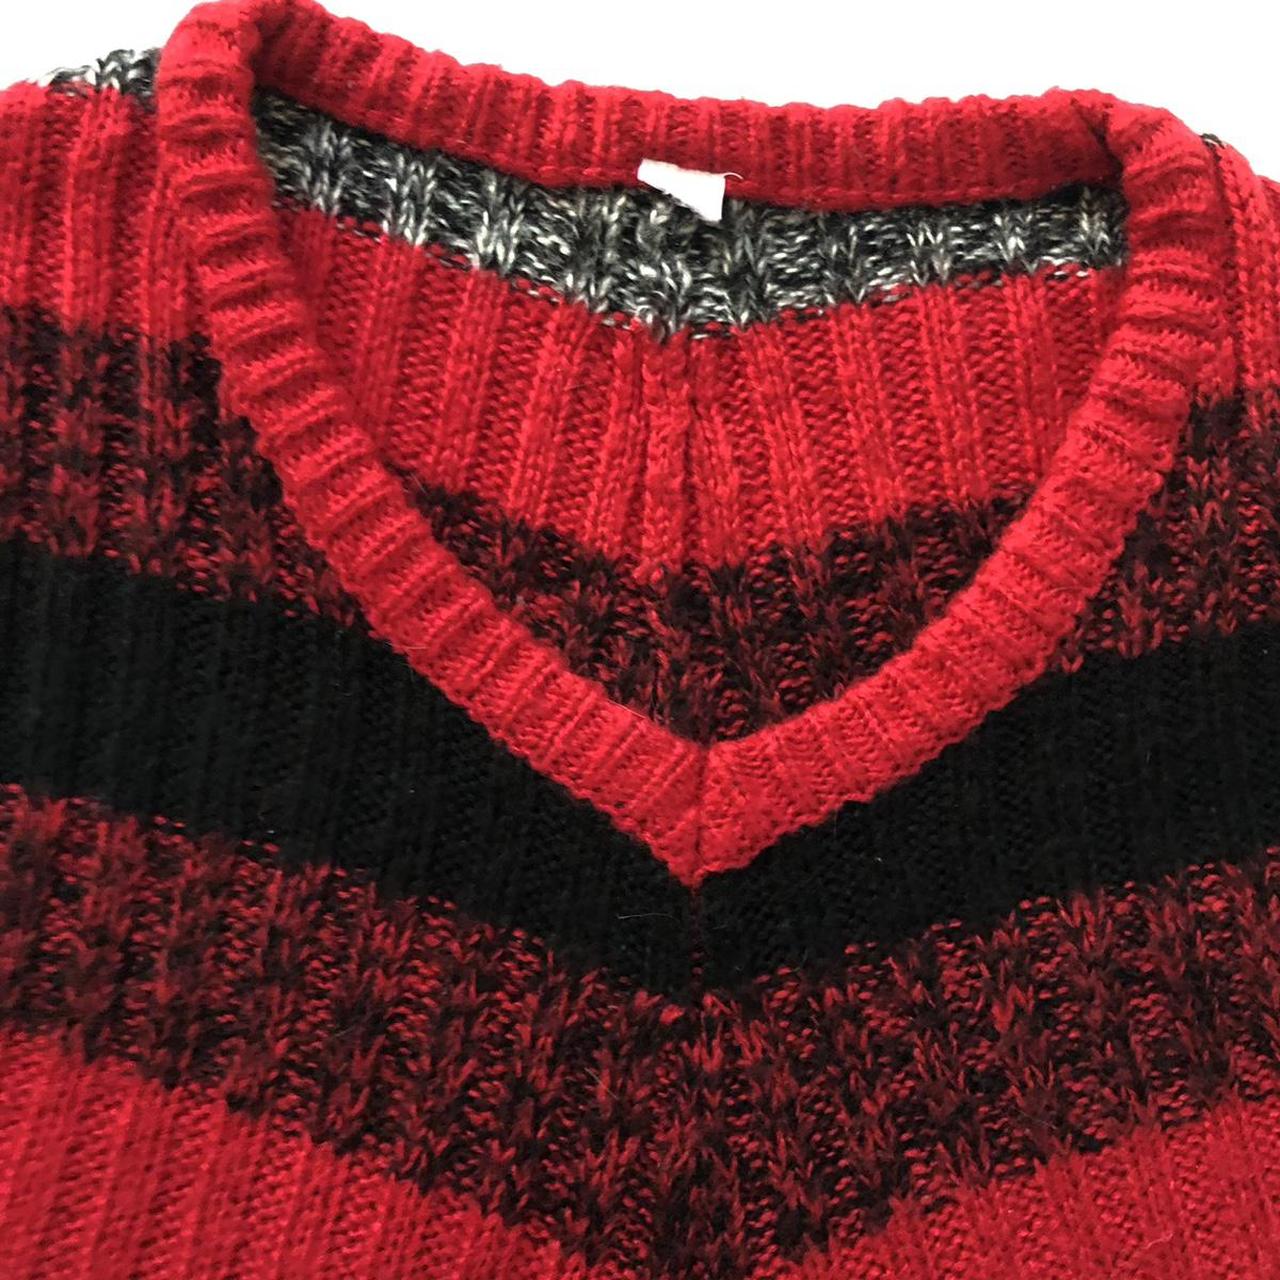 Black Red Knitted Jumper | Great condition | Retro |... - Depop